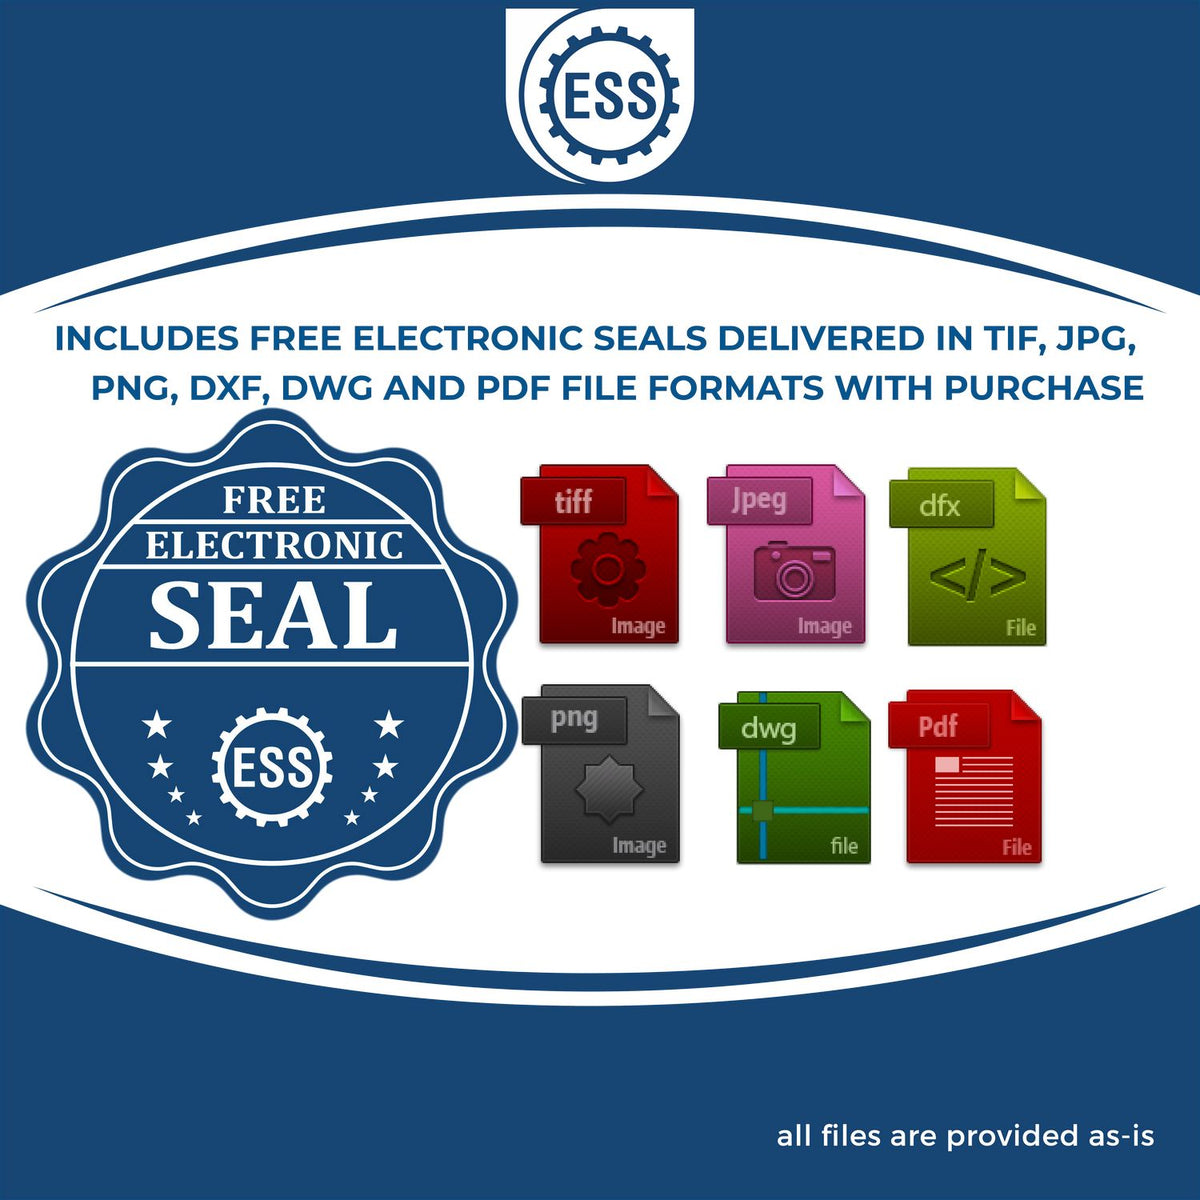 An infographic for the free electronic seal for the PSI Rhode Island Notary Stamp illustrating the different file type icons such as DXF, DWG, TIF, JPG and PNG.